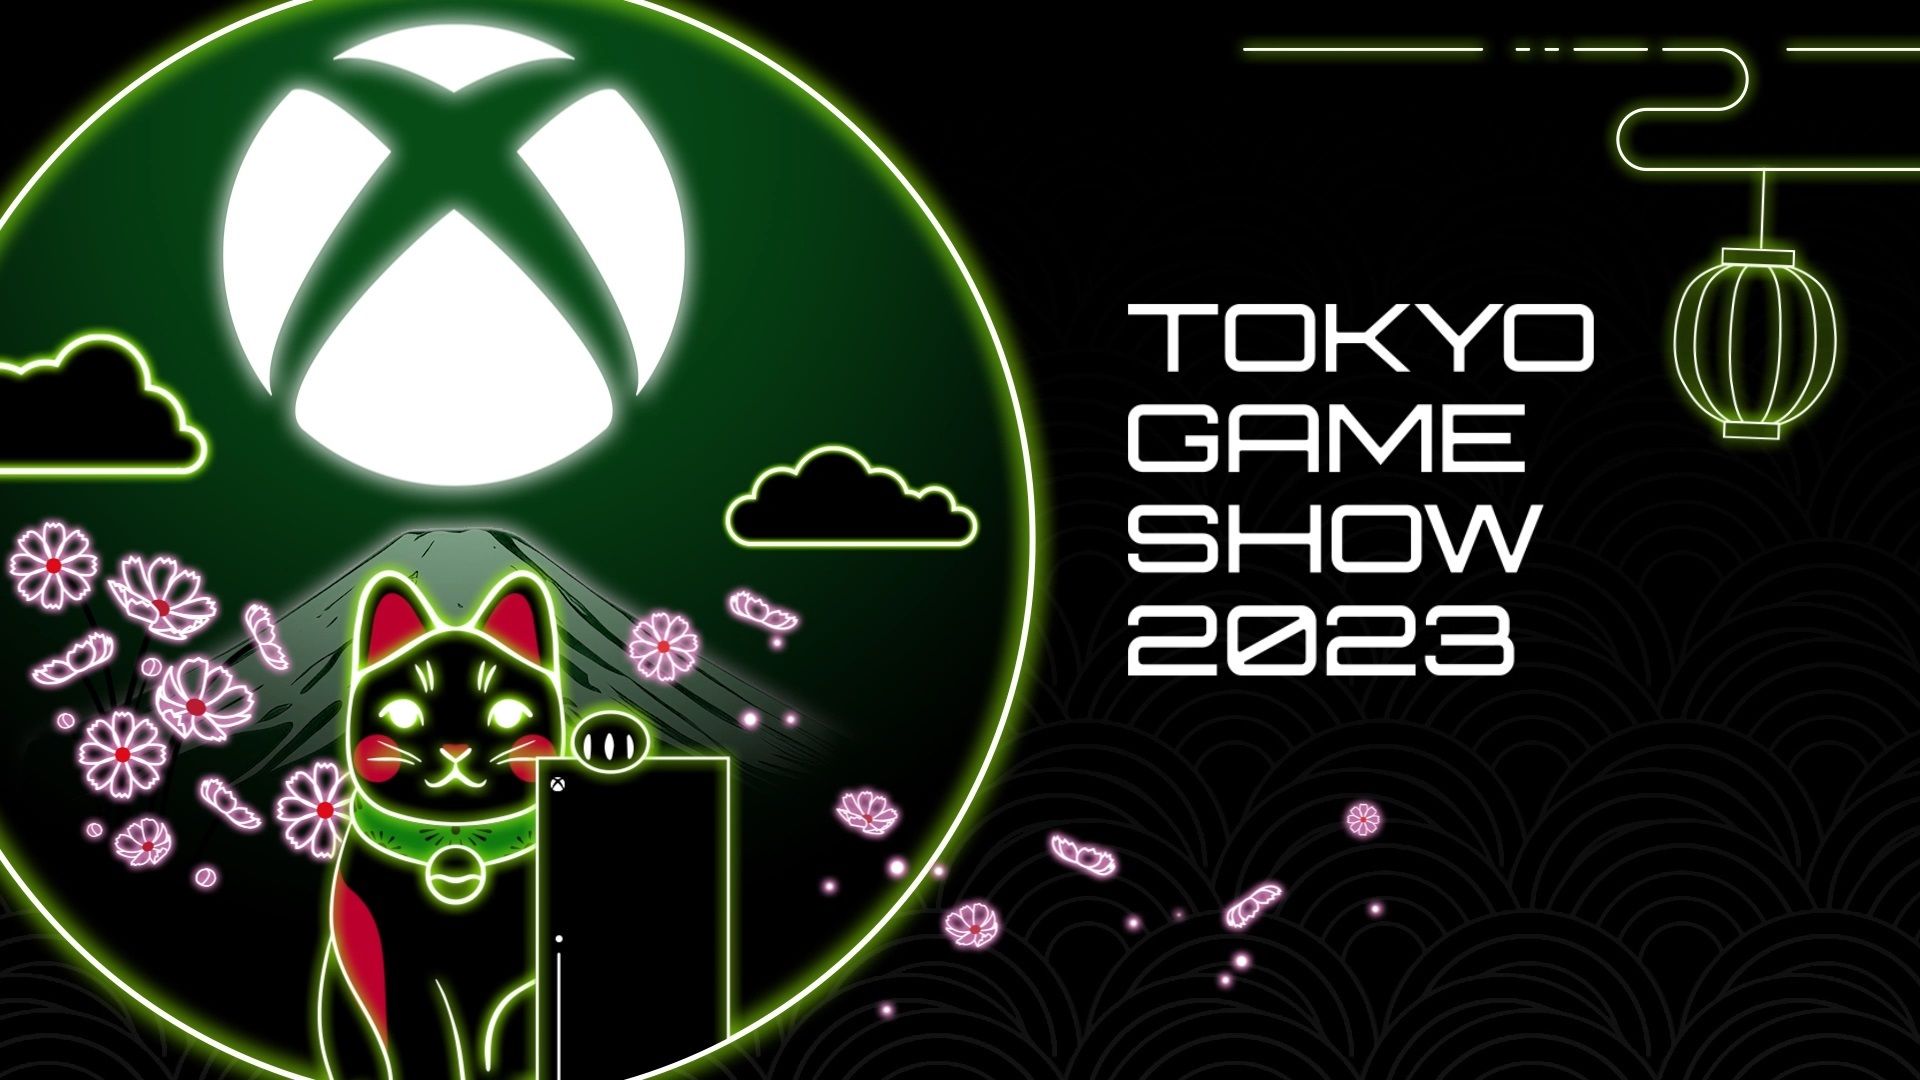 xbox tokyo game show 2023 graphic